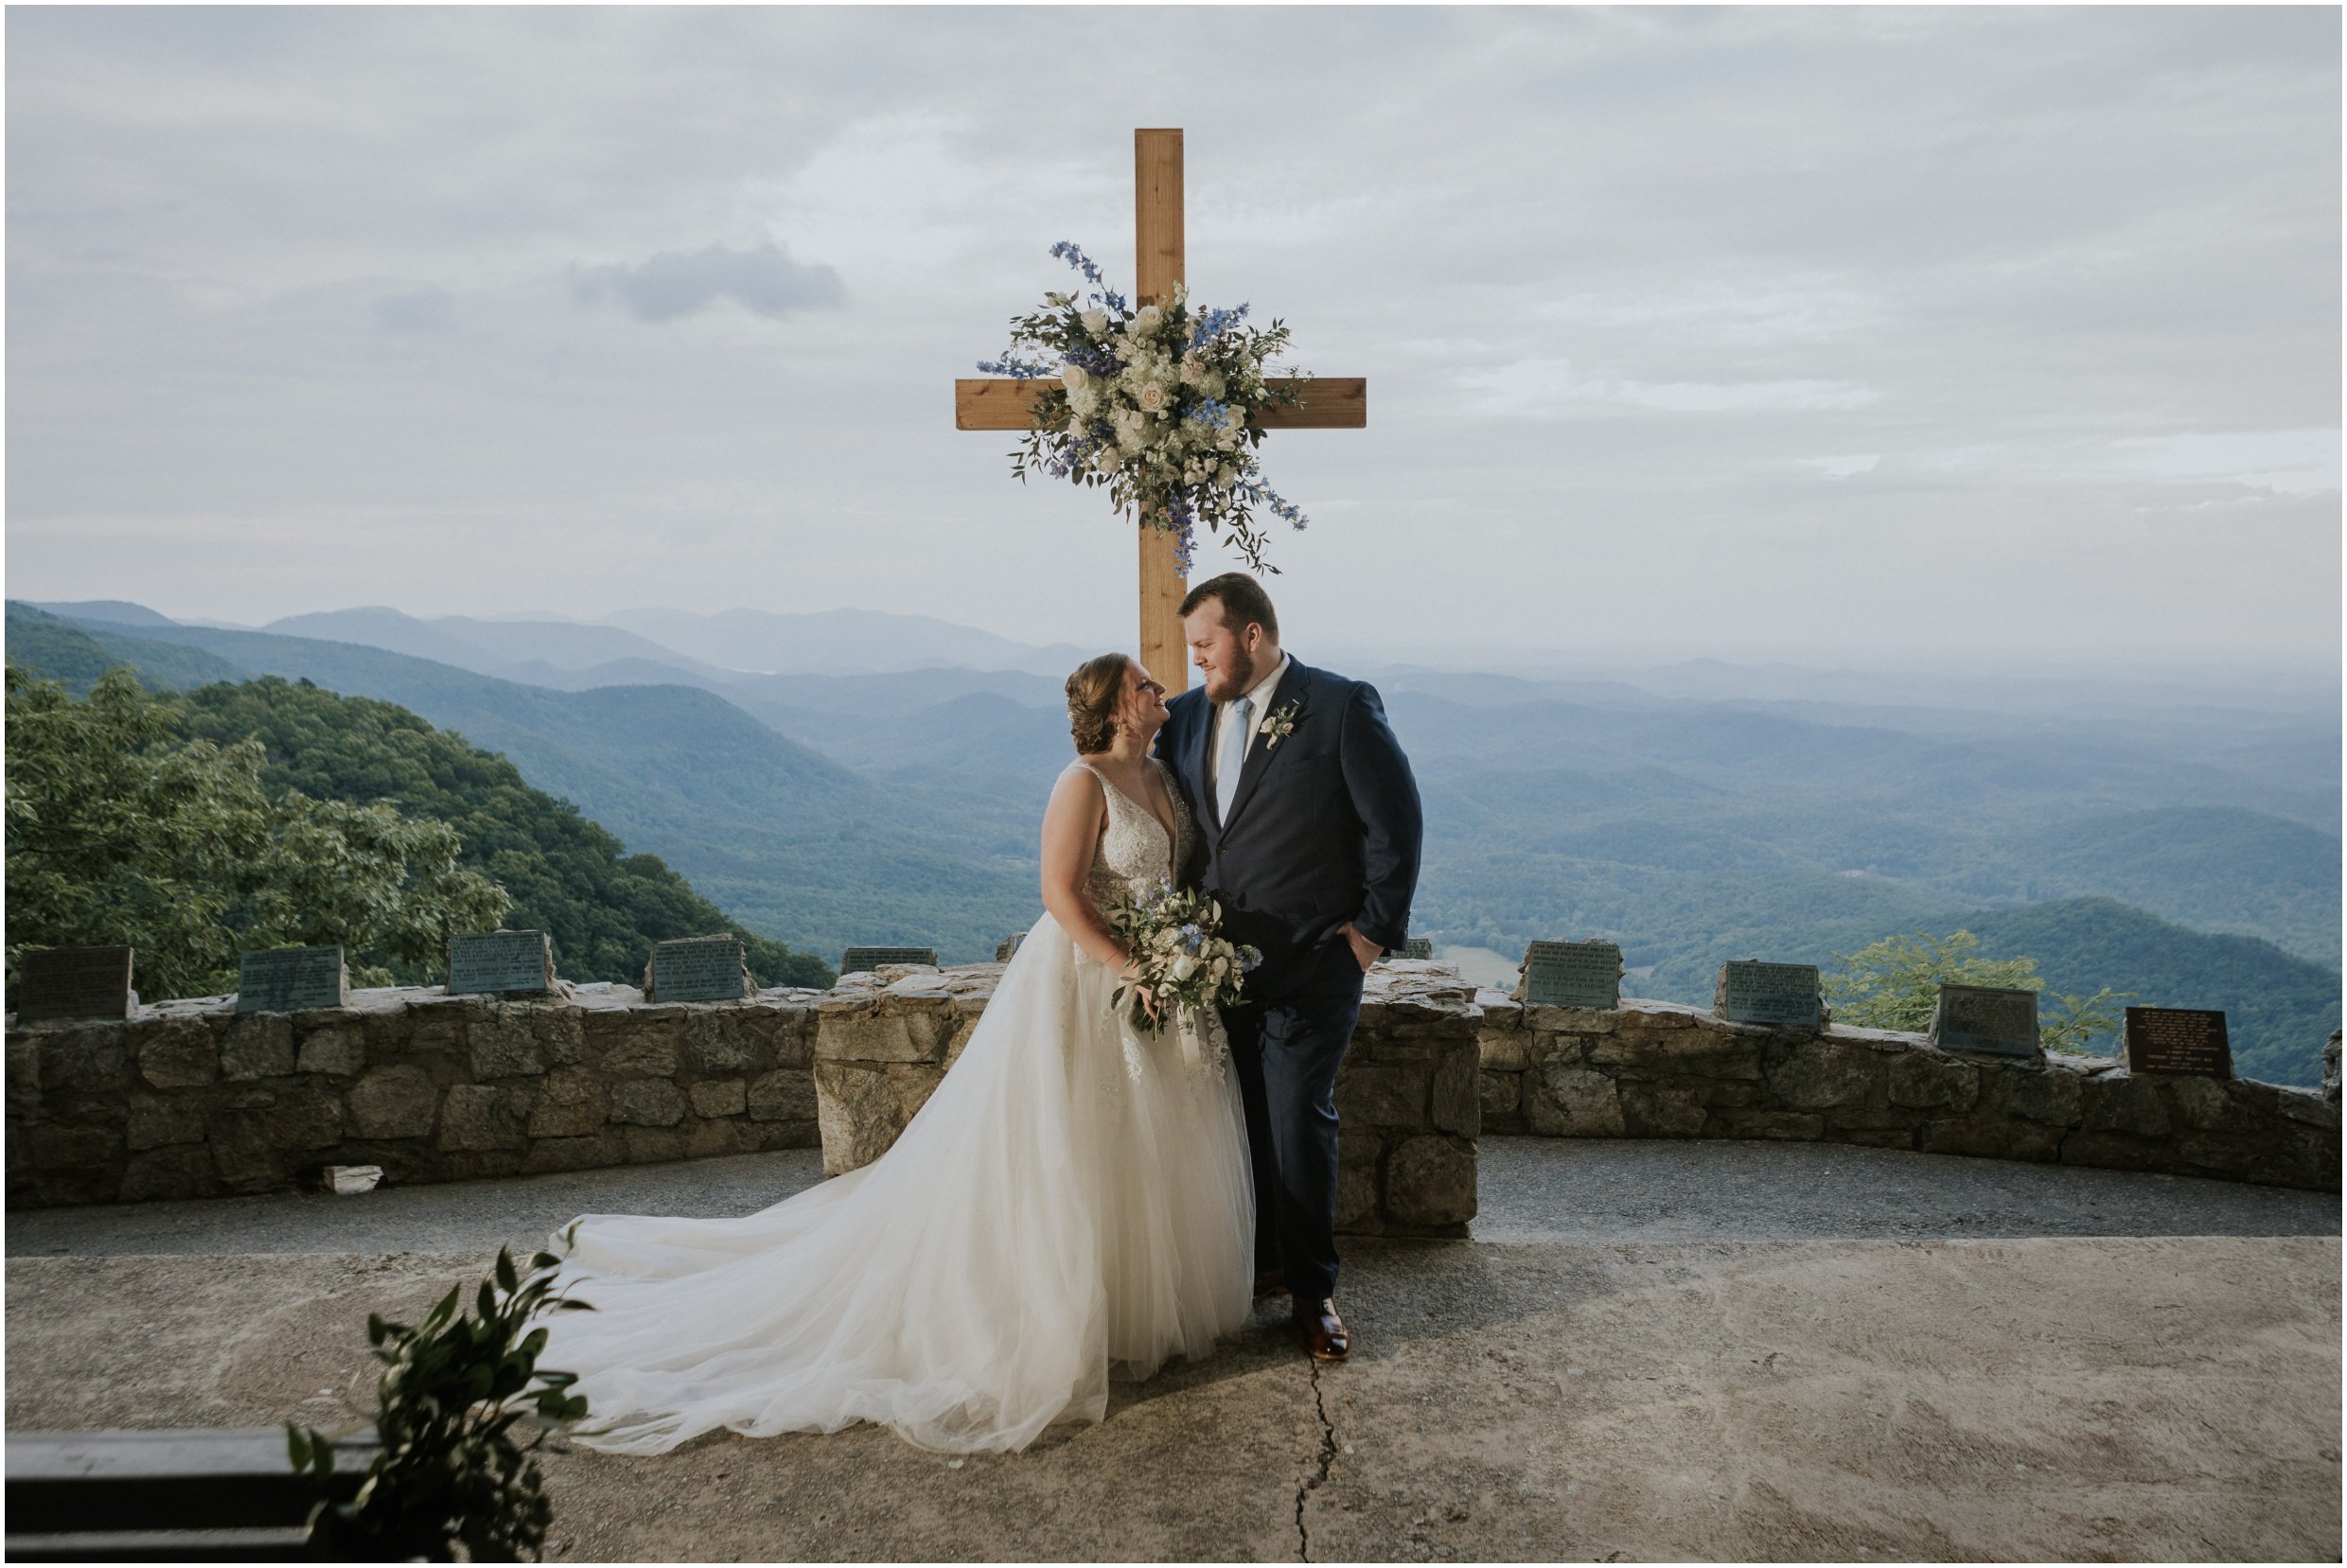 the-pretty-place-fred-symmes-chapel-greenville-sc-brevard-nc-camp-mountain-wedding-south-carolina-tennessee-katy-sergent-photography_0013.jpg